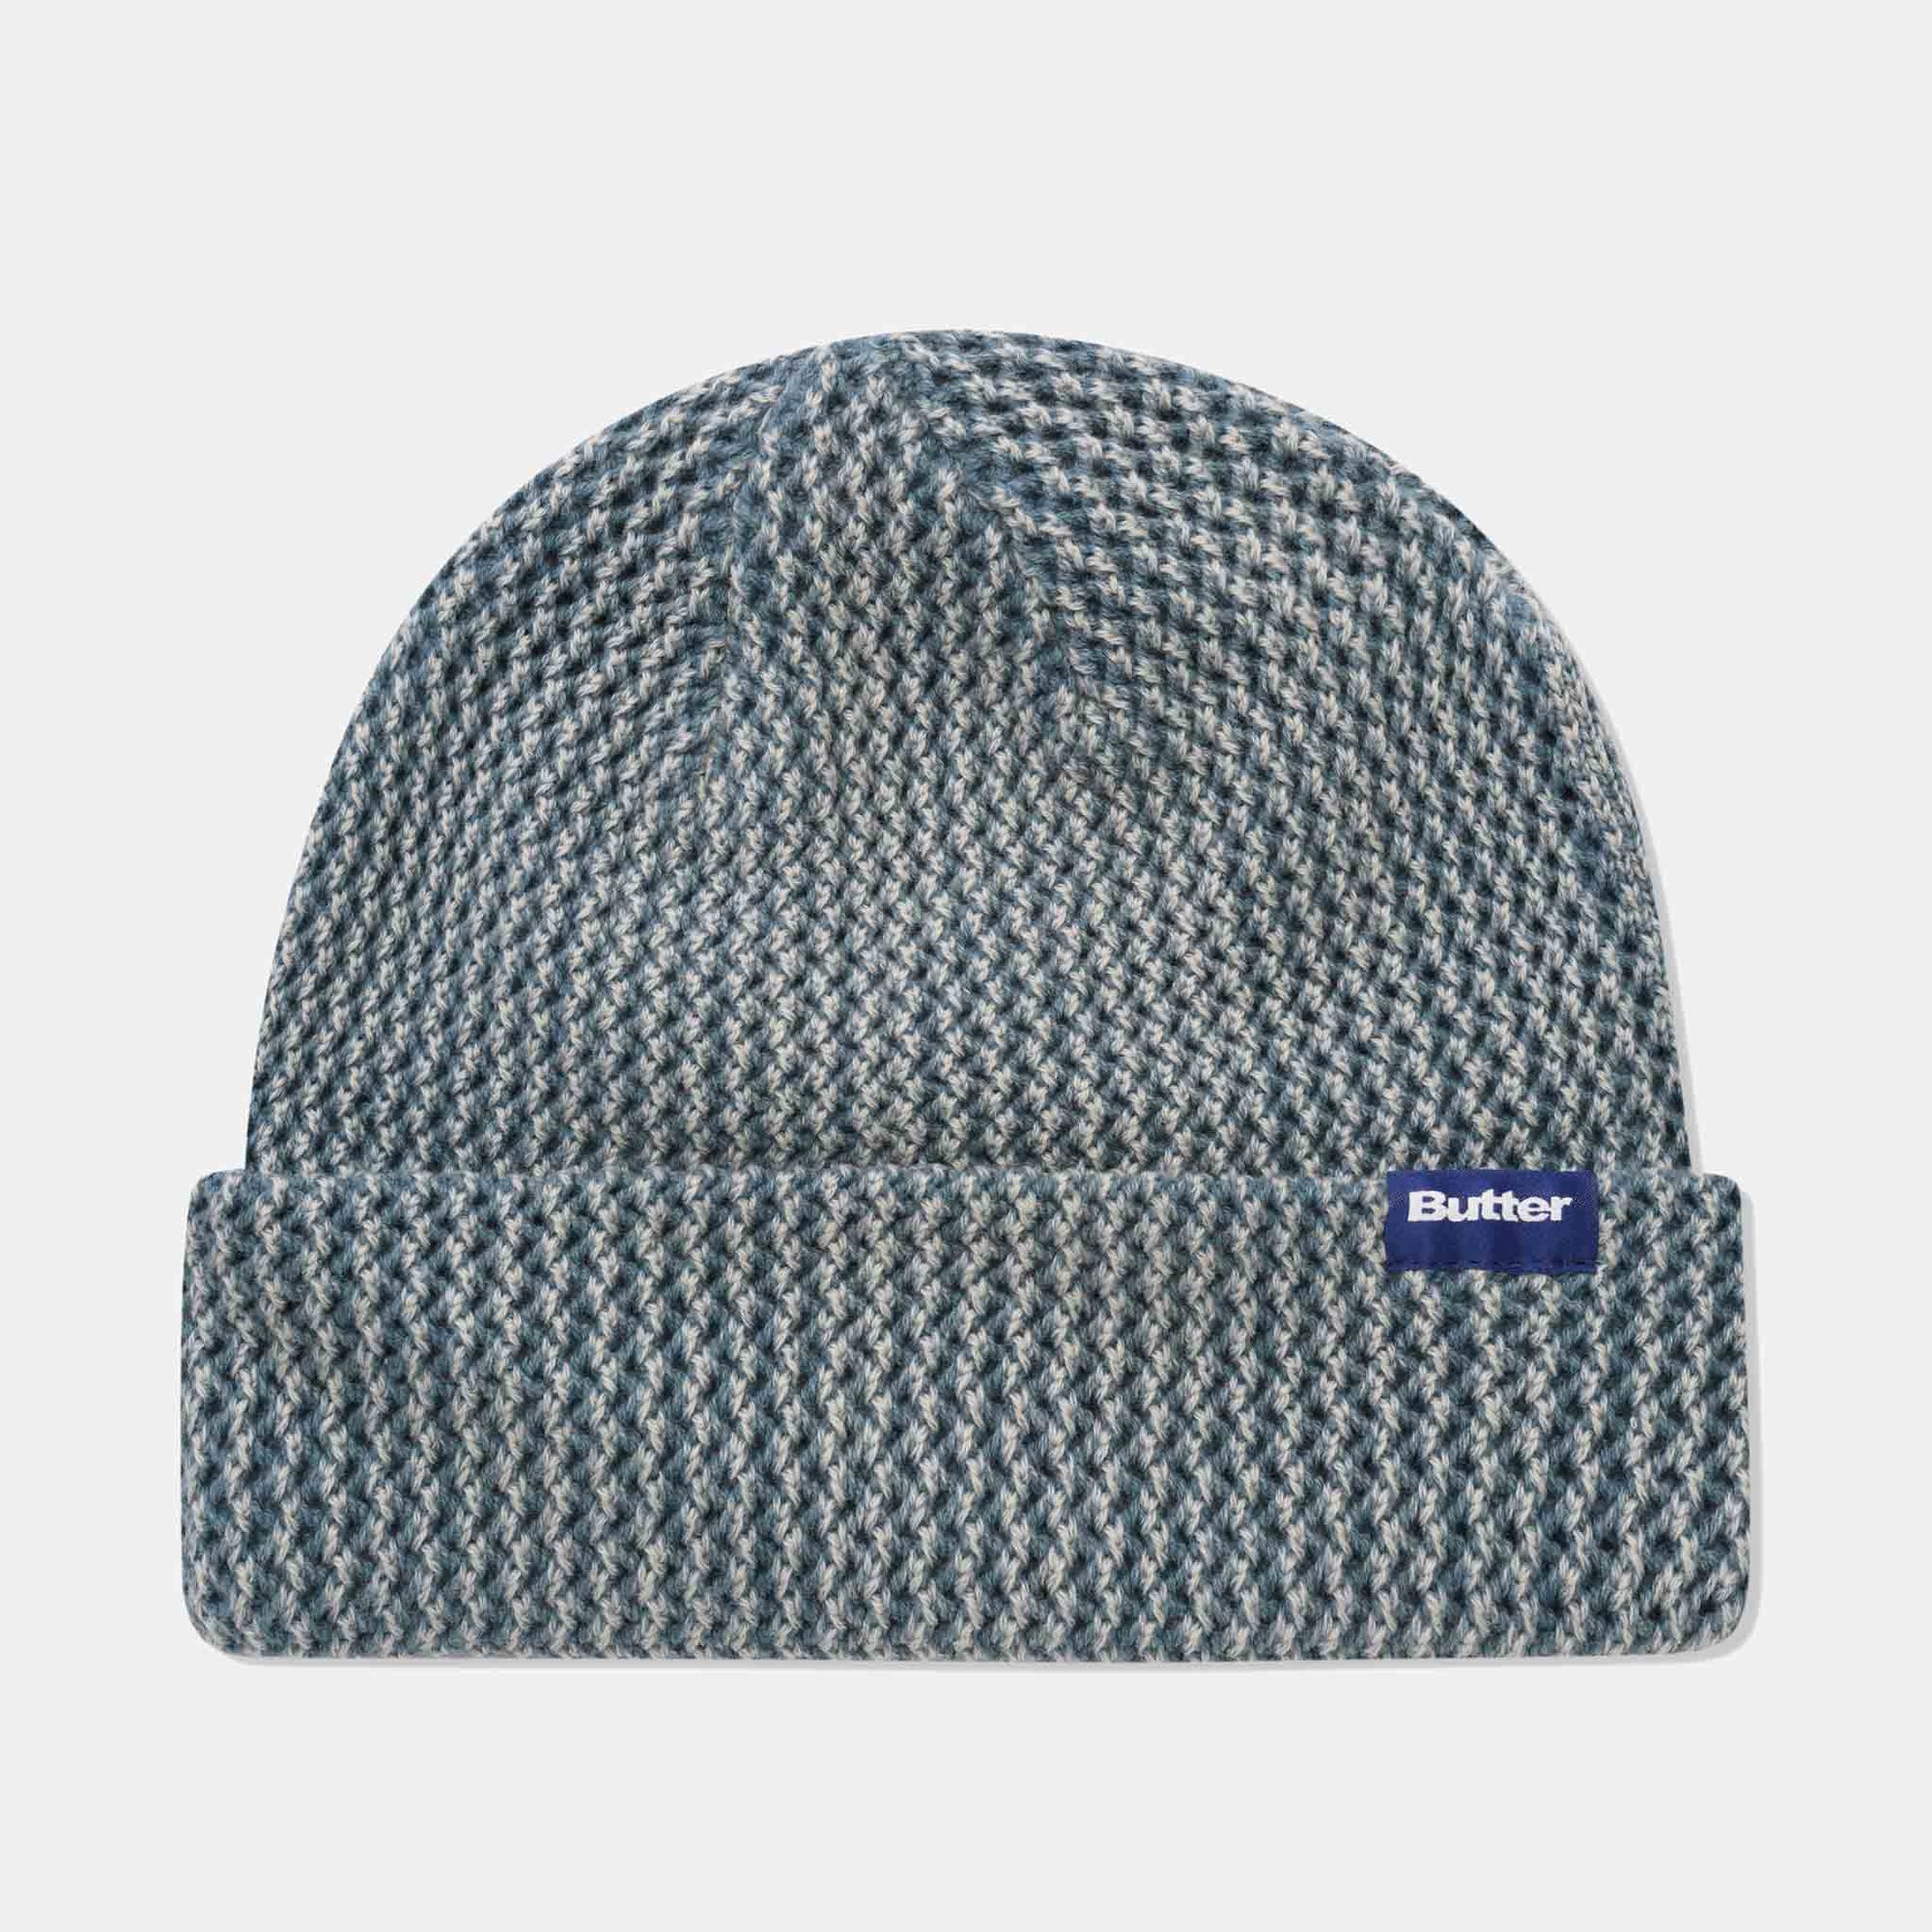 Butter Goods - Dyed Beanie - Washed Navy